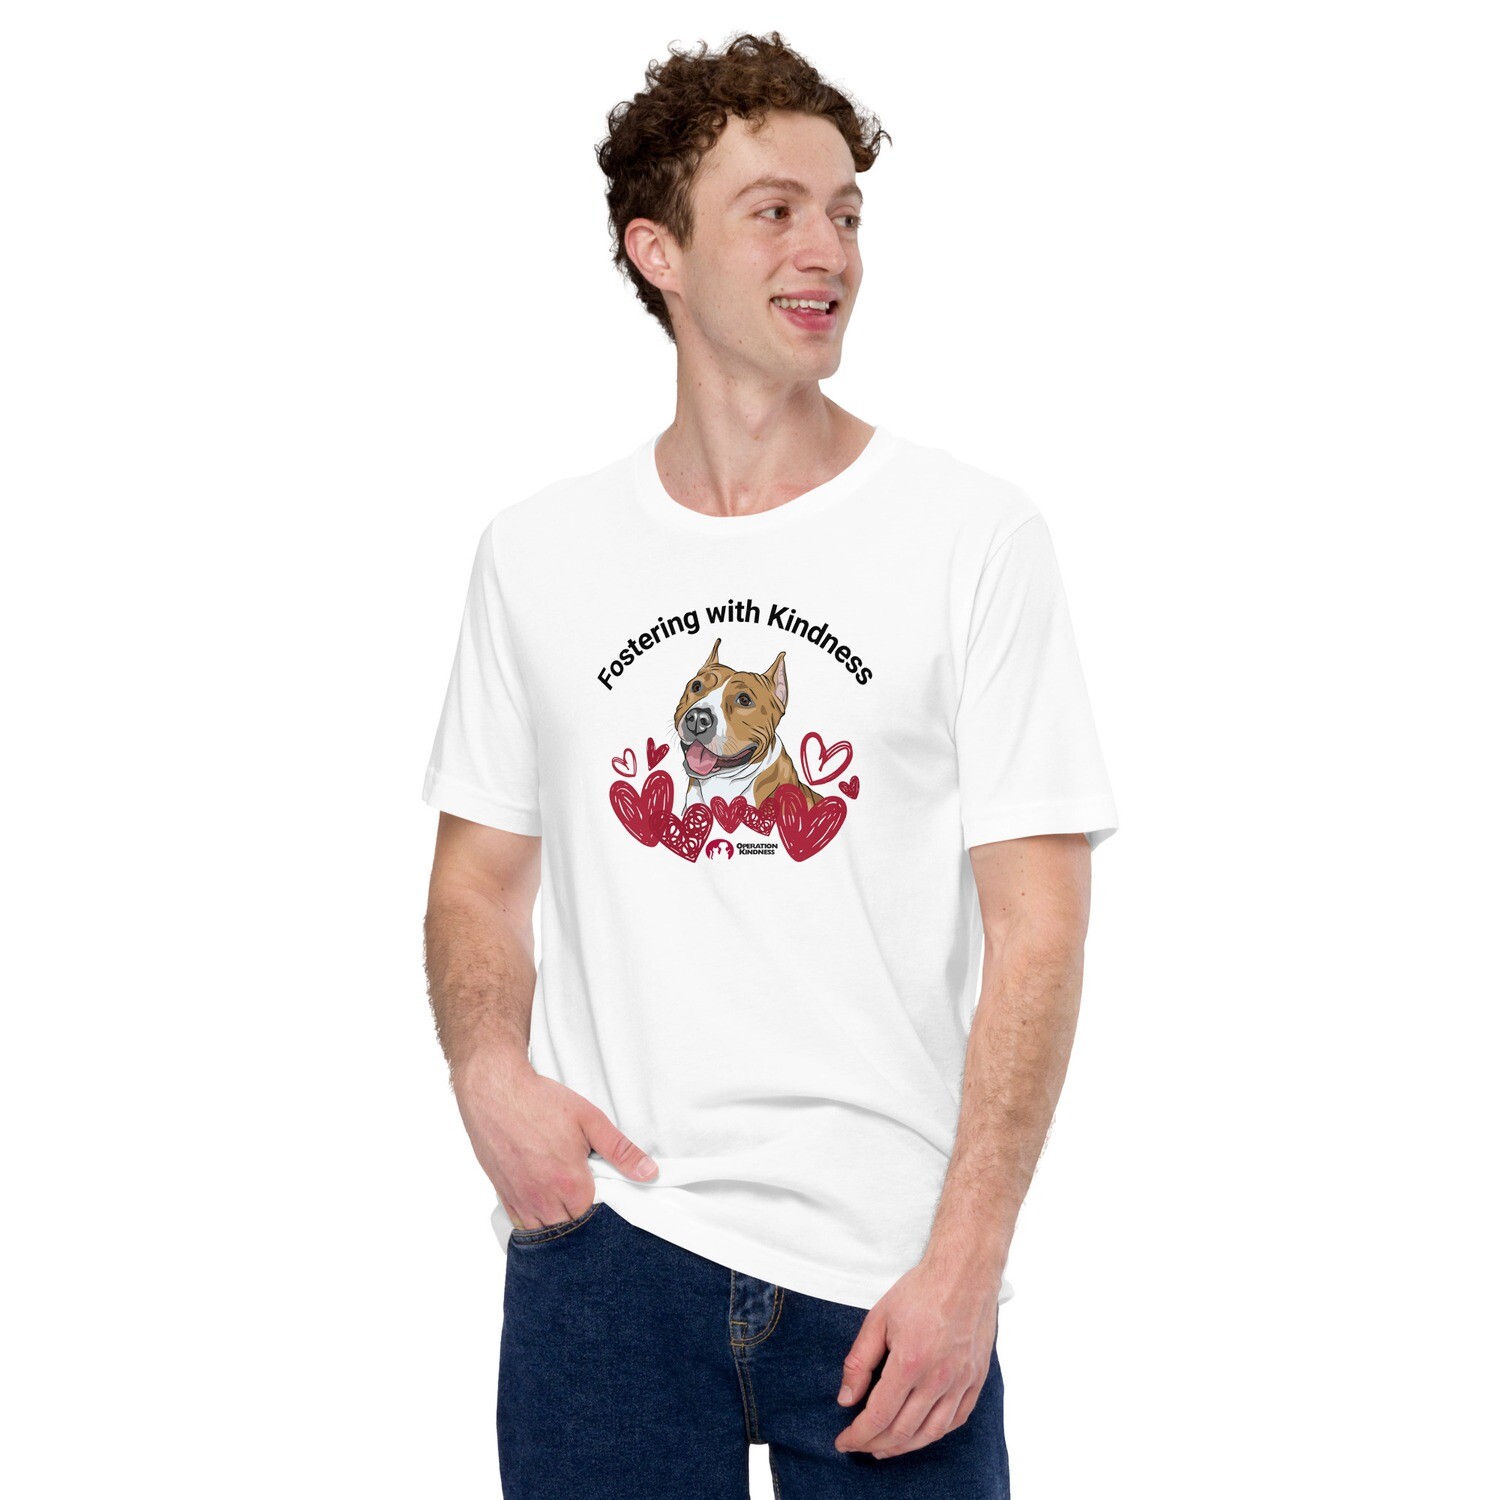 Fostering with Kindness - Dog - unisex t-shirt